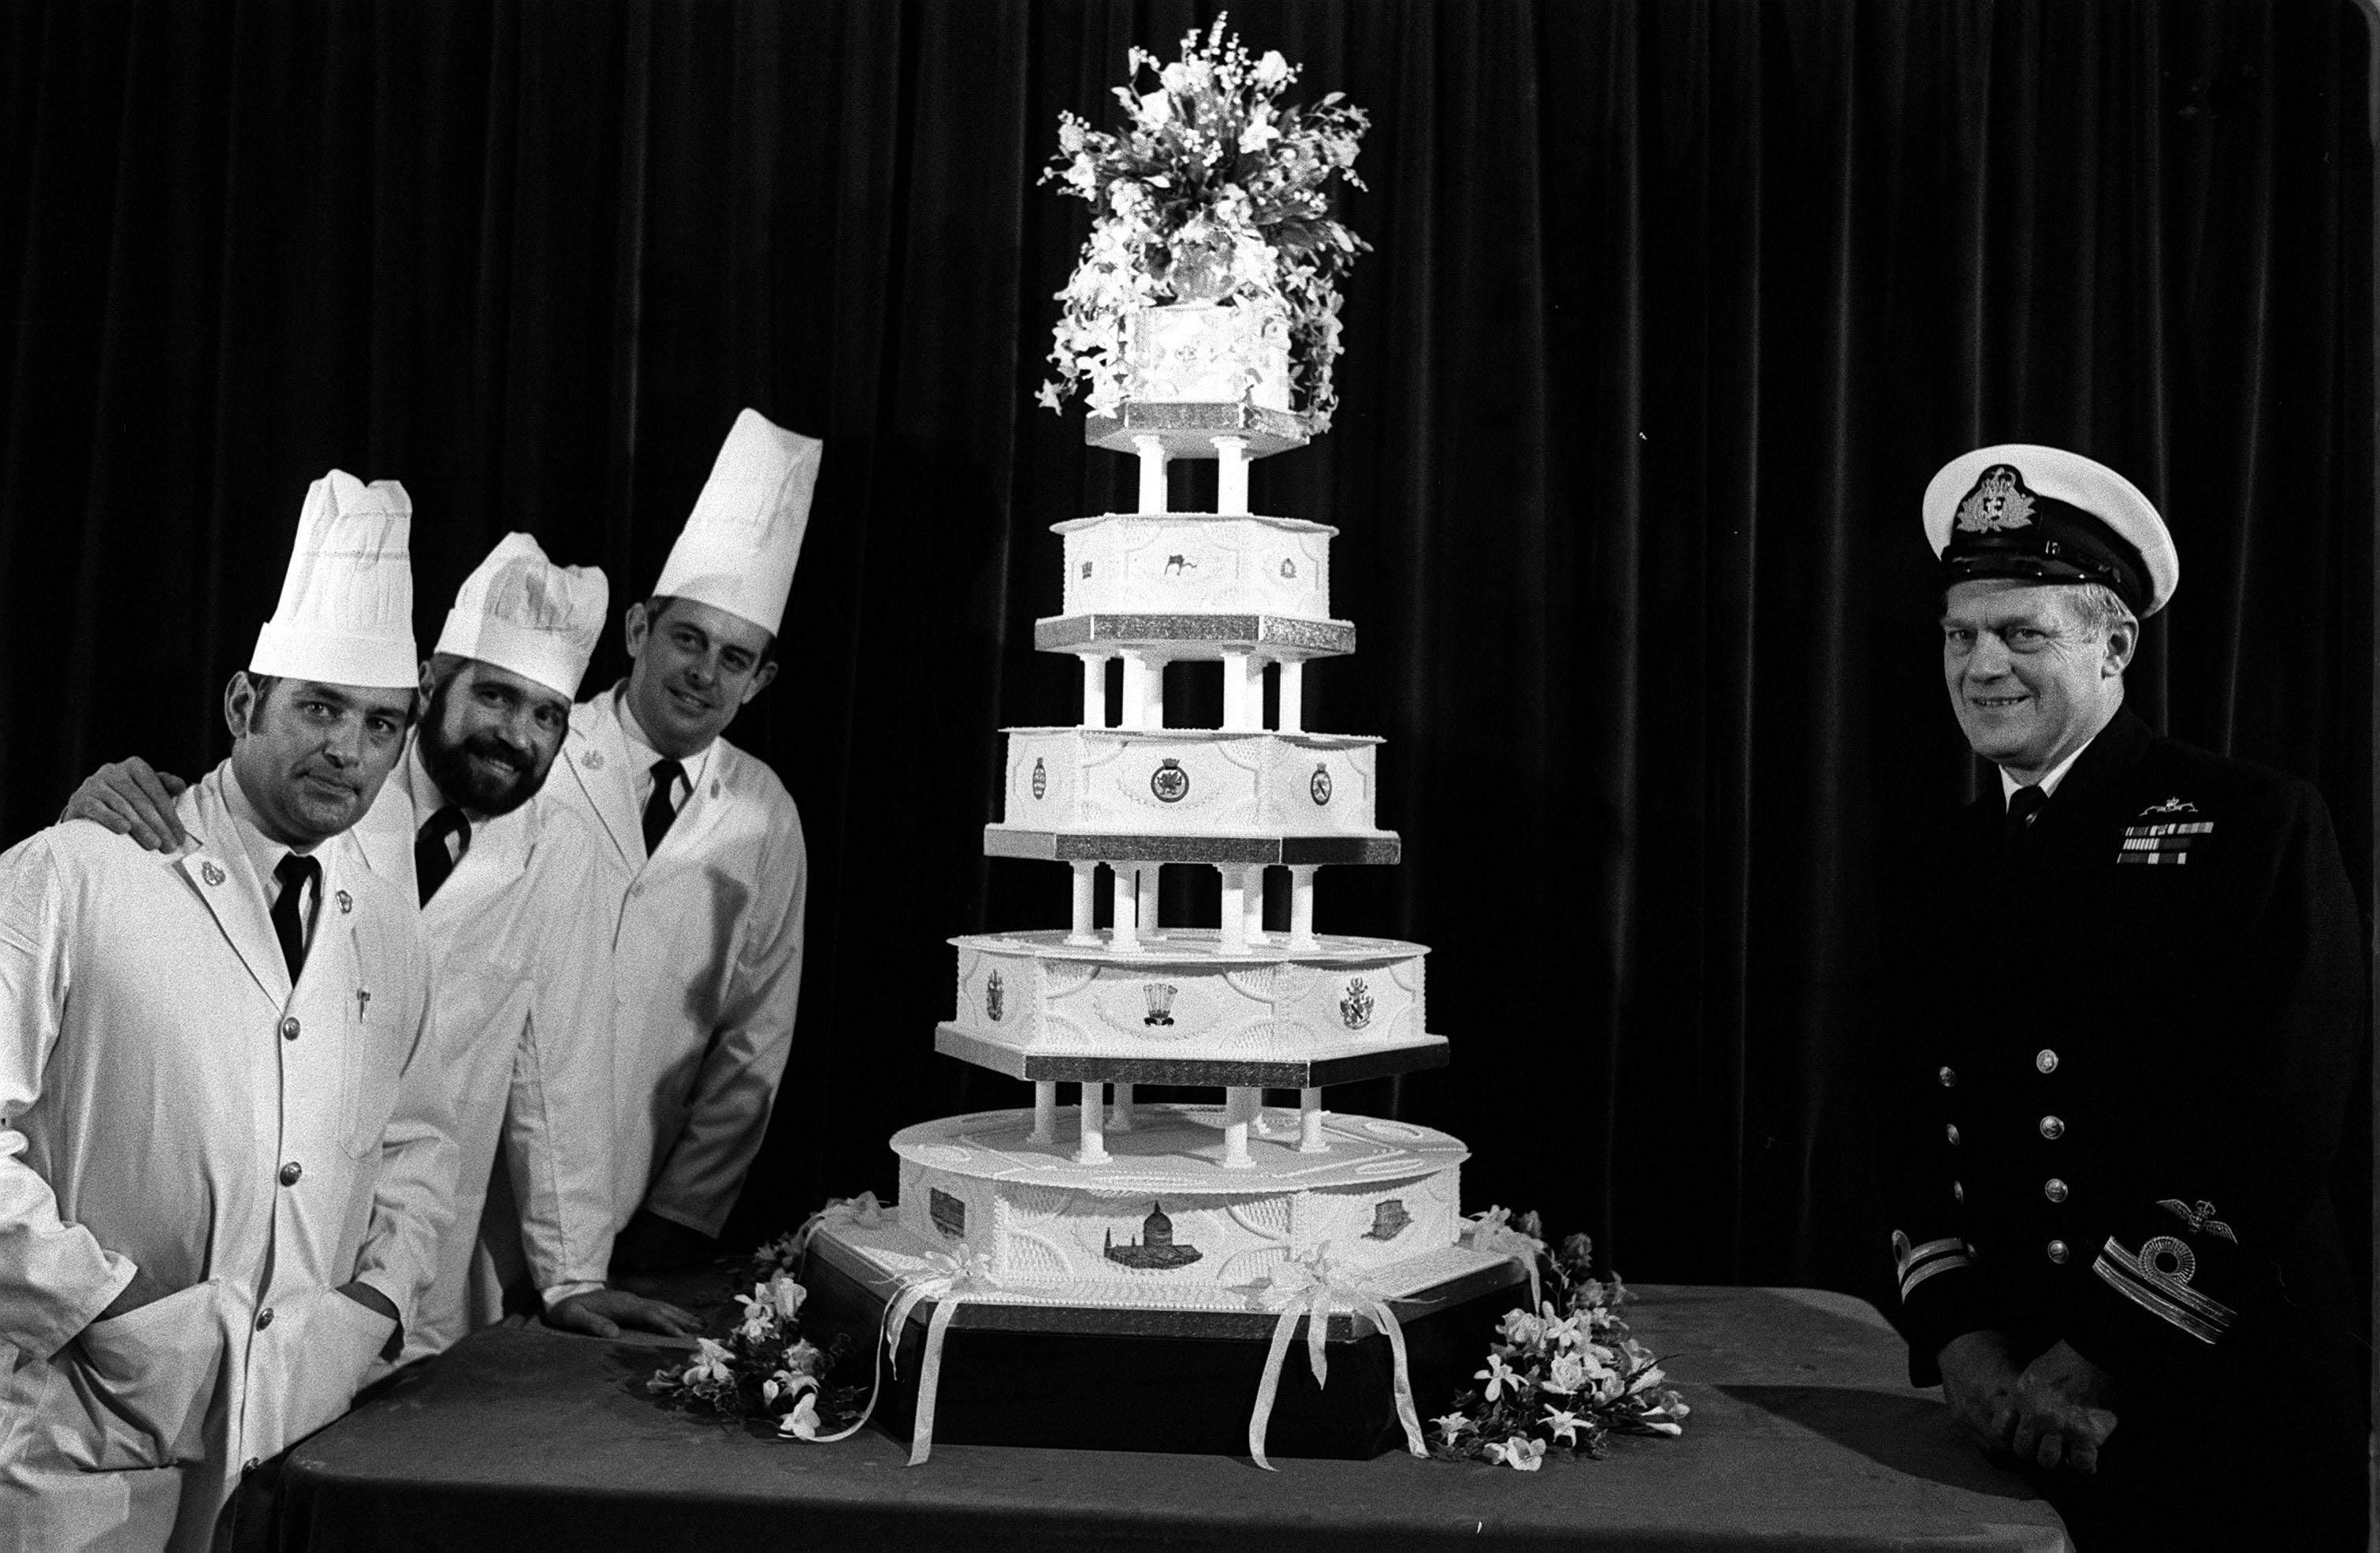 The official royal wedding cake for Diana Spencer and Prince Charles made by the Royal Navy's Cookery School 5 ft high and 255 ilbs hms Pembroke in Chatham (Photograph by PA Images—Getty)